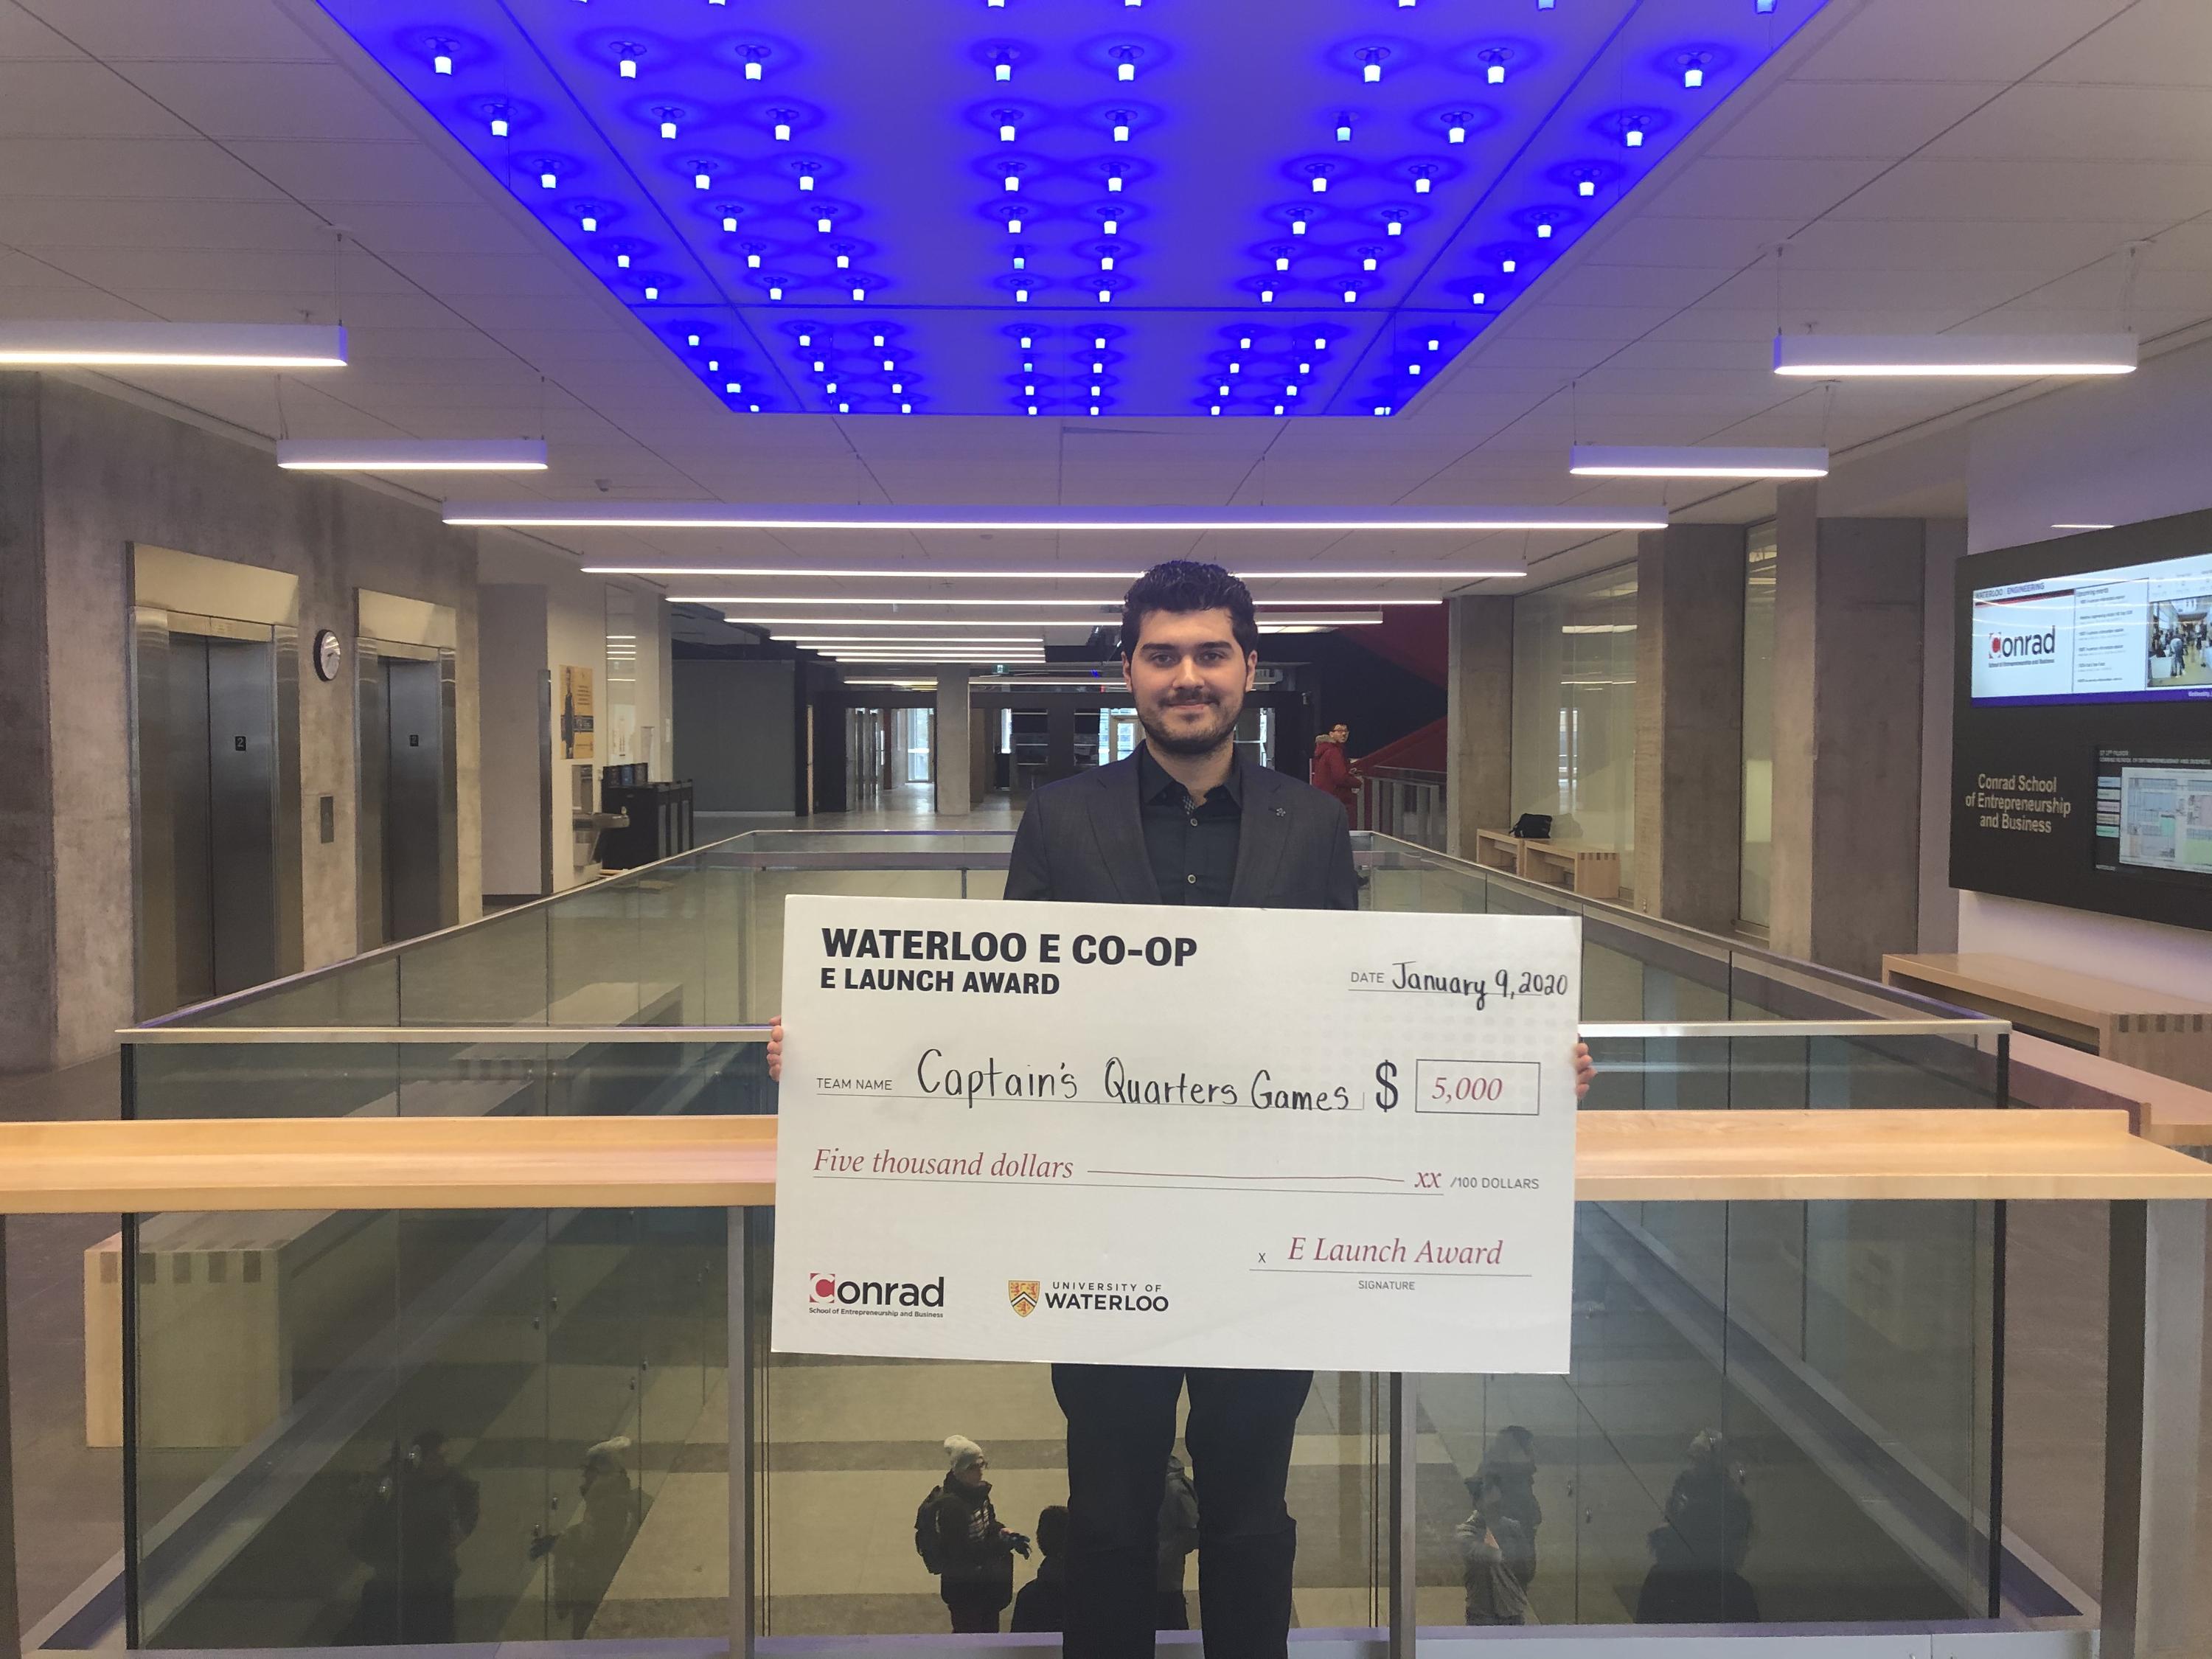 Arman Naziri, founder of Captain's Quarters Games holding cheque for $5,000